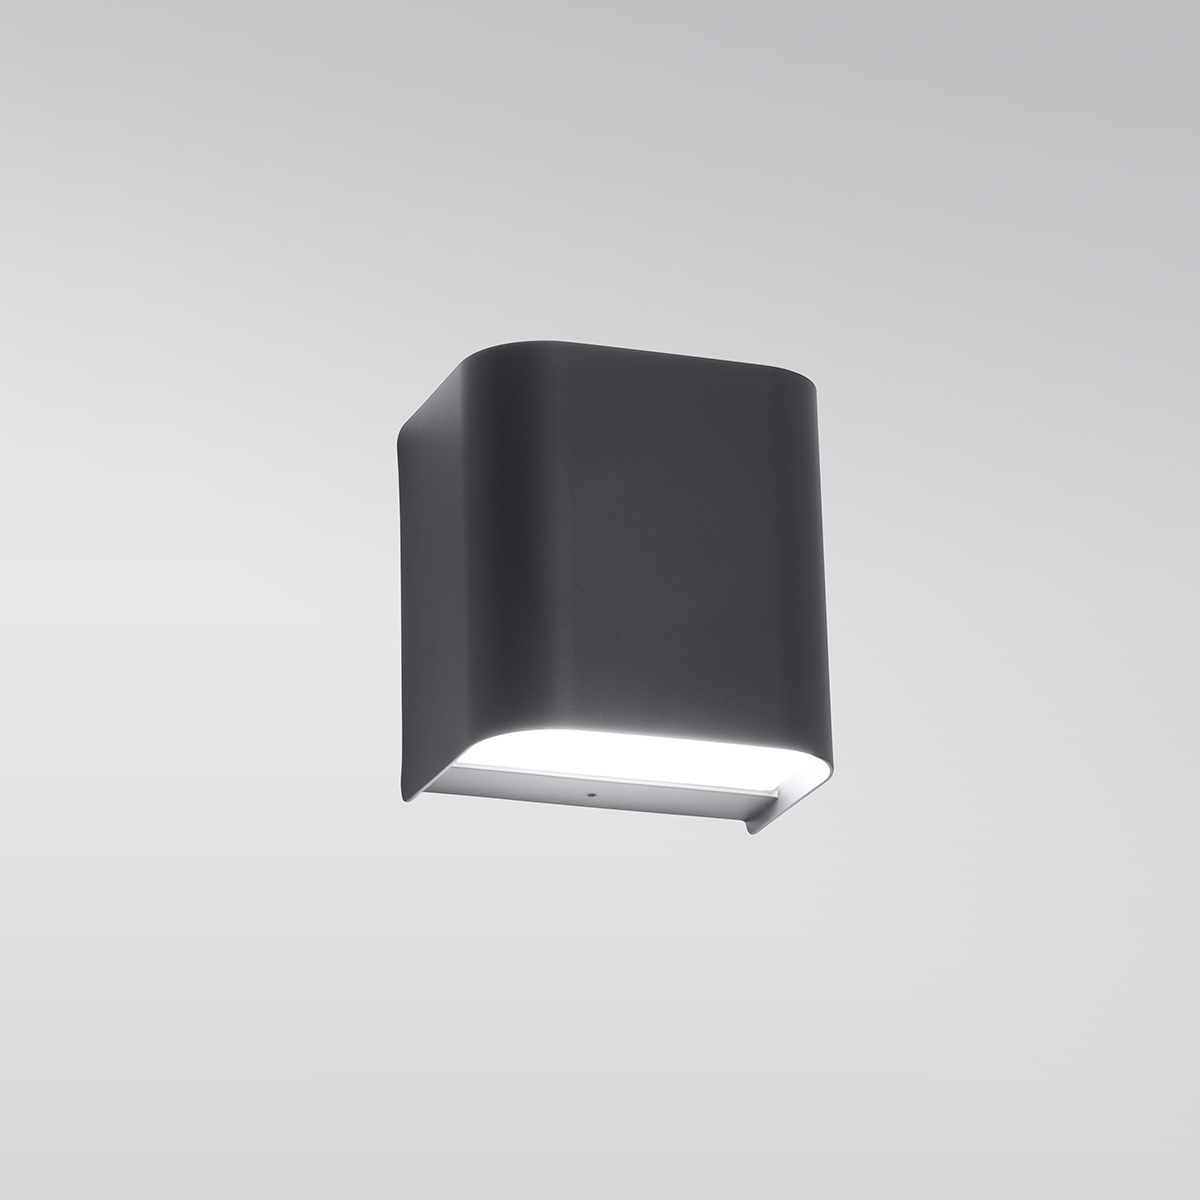 Square rounded corner small Anara sconce